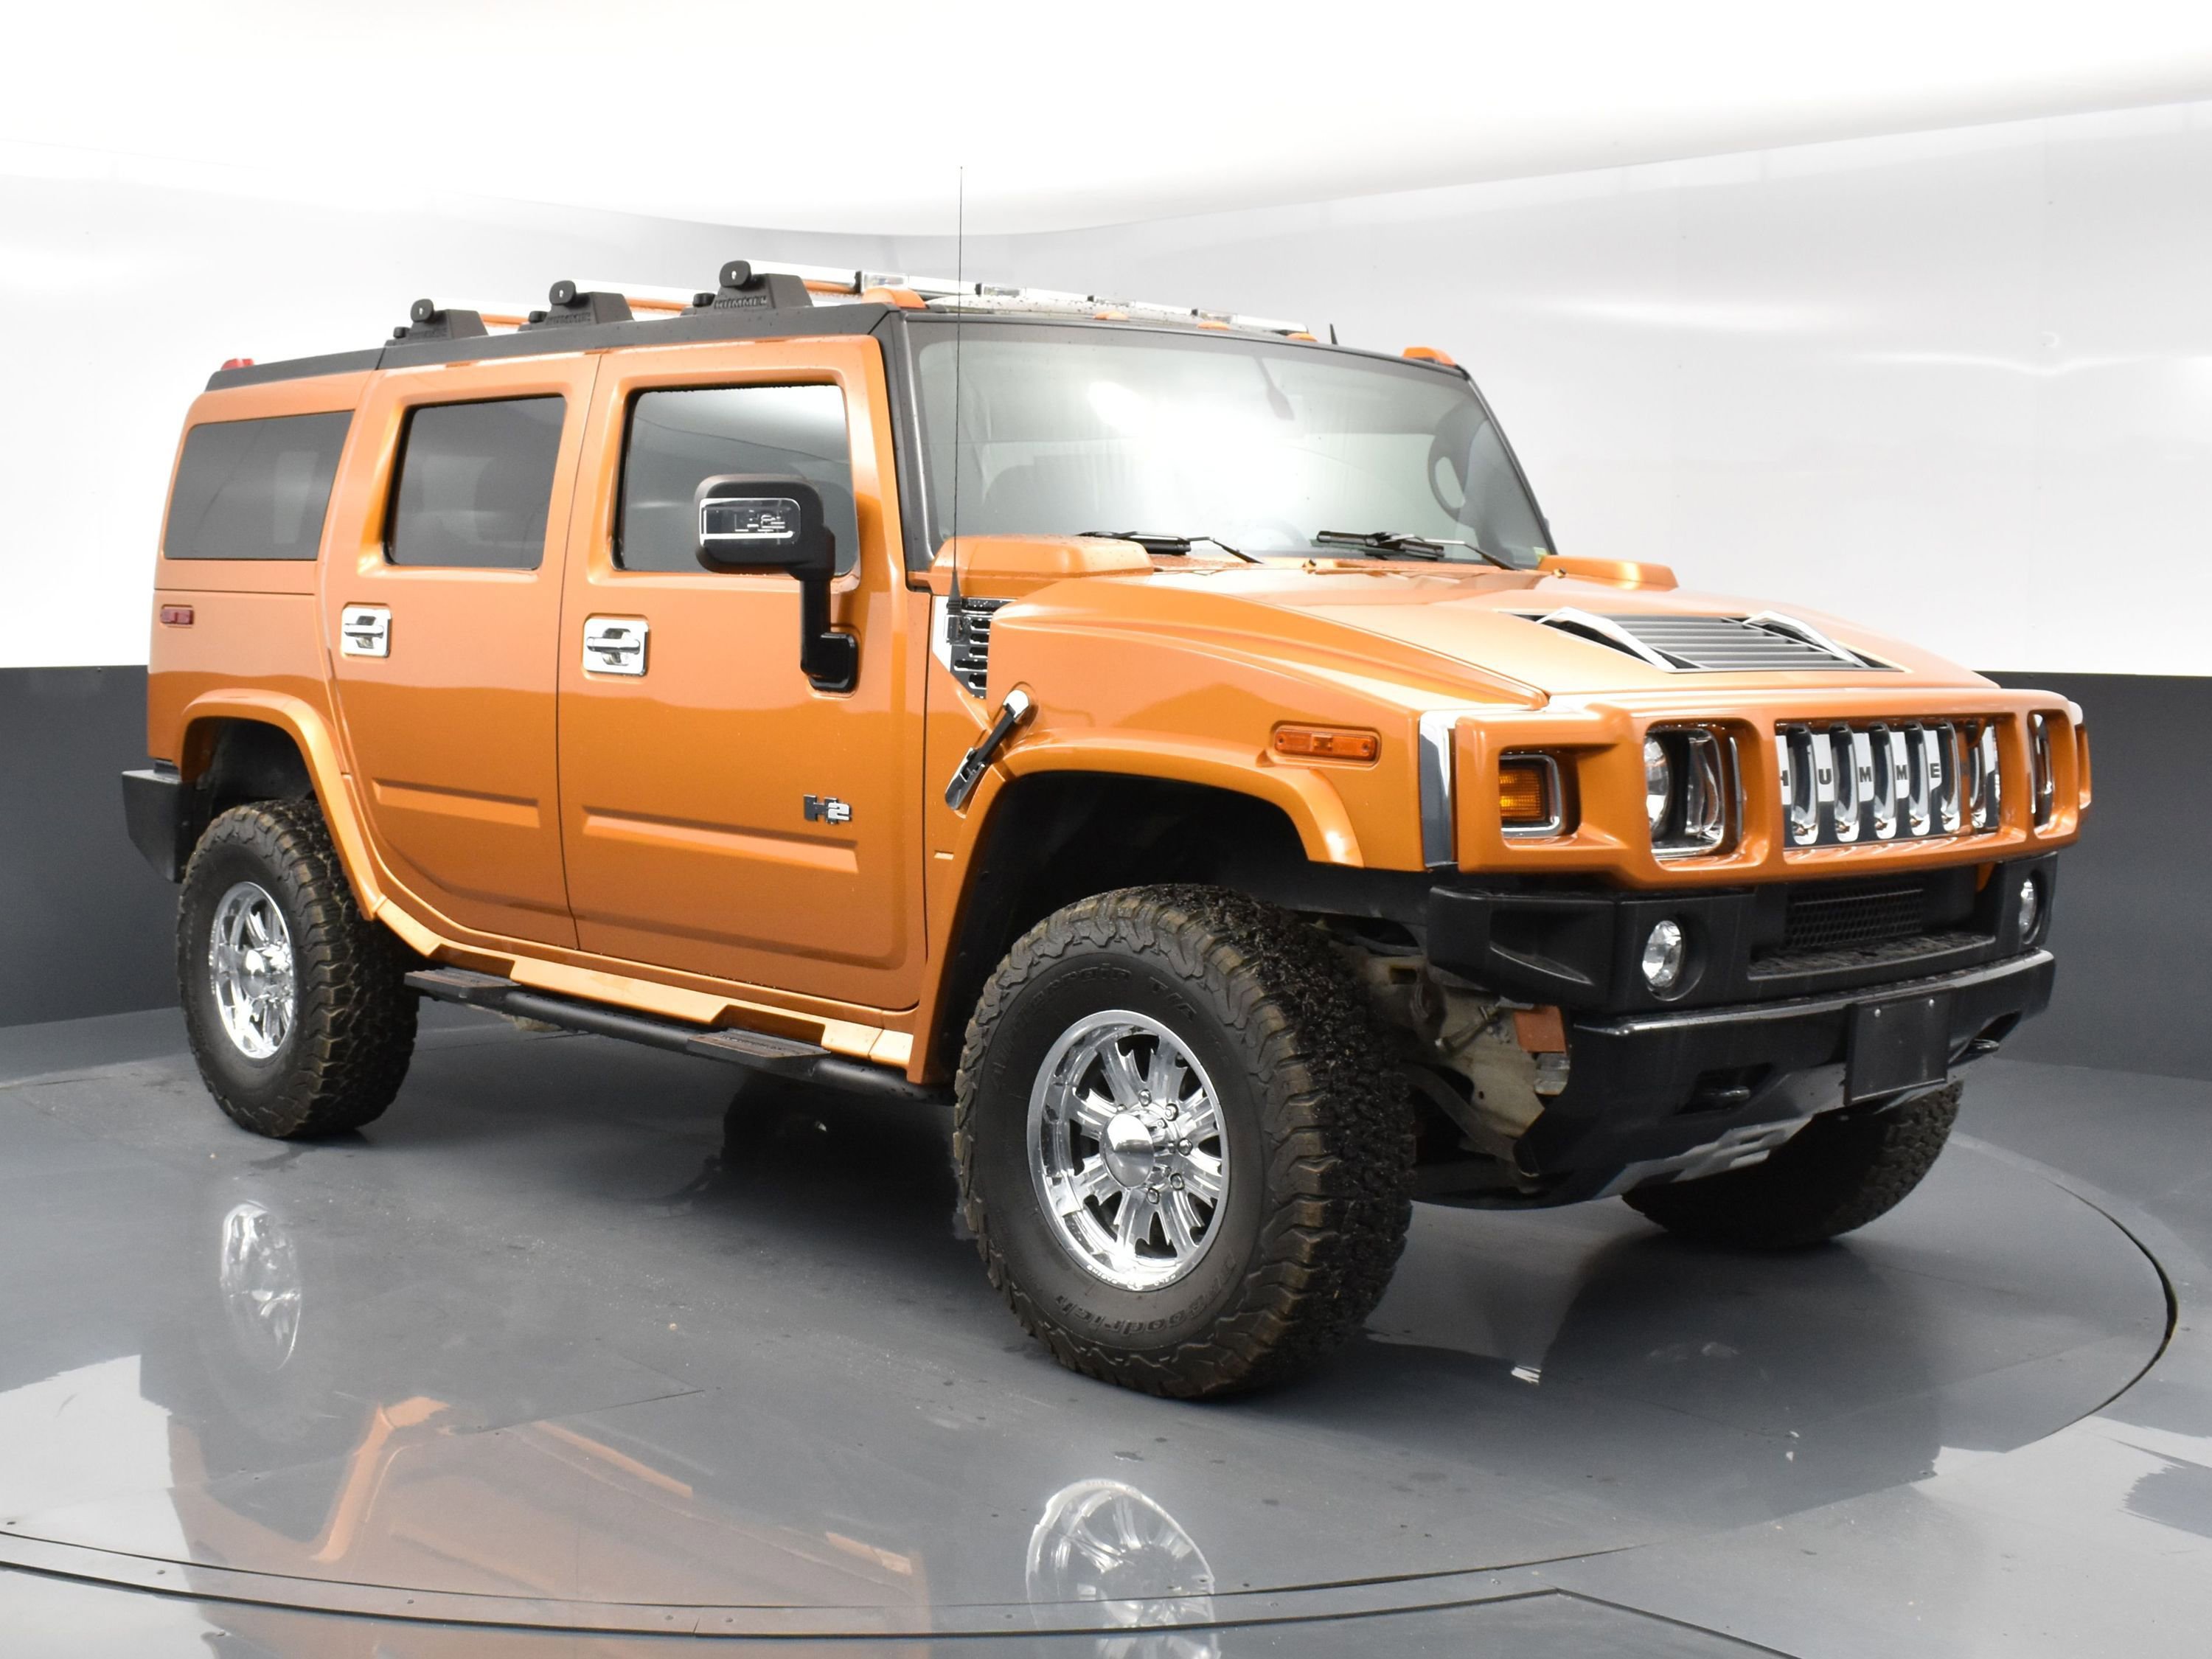 Pre-Owned 2006 HUMMER H2 4dr Wgn 4WD SUV SUV in Cary #PSB1963 | Hendrick  Dodge Cary